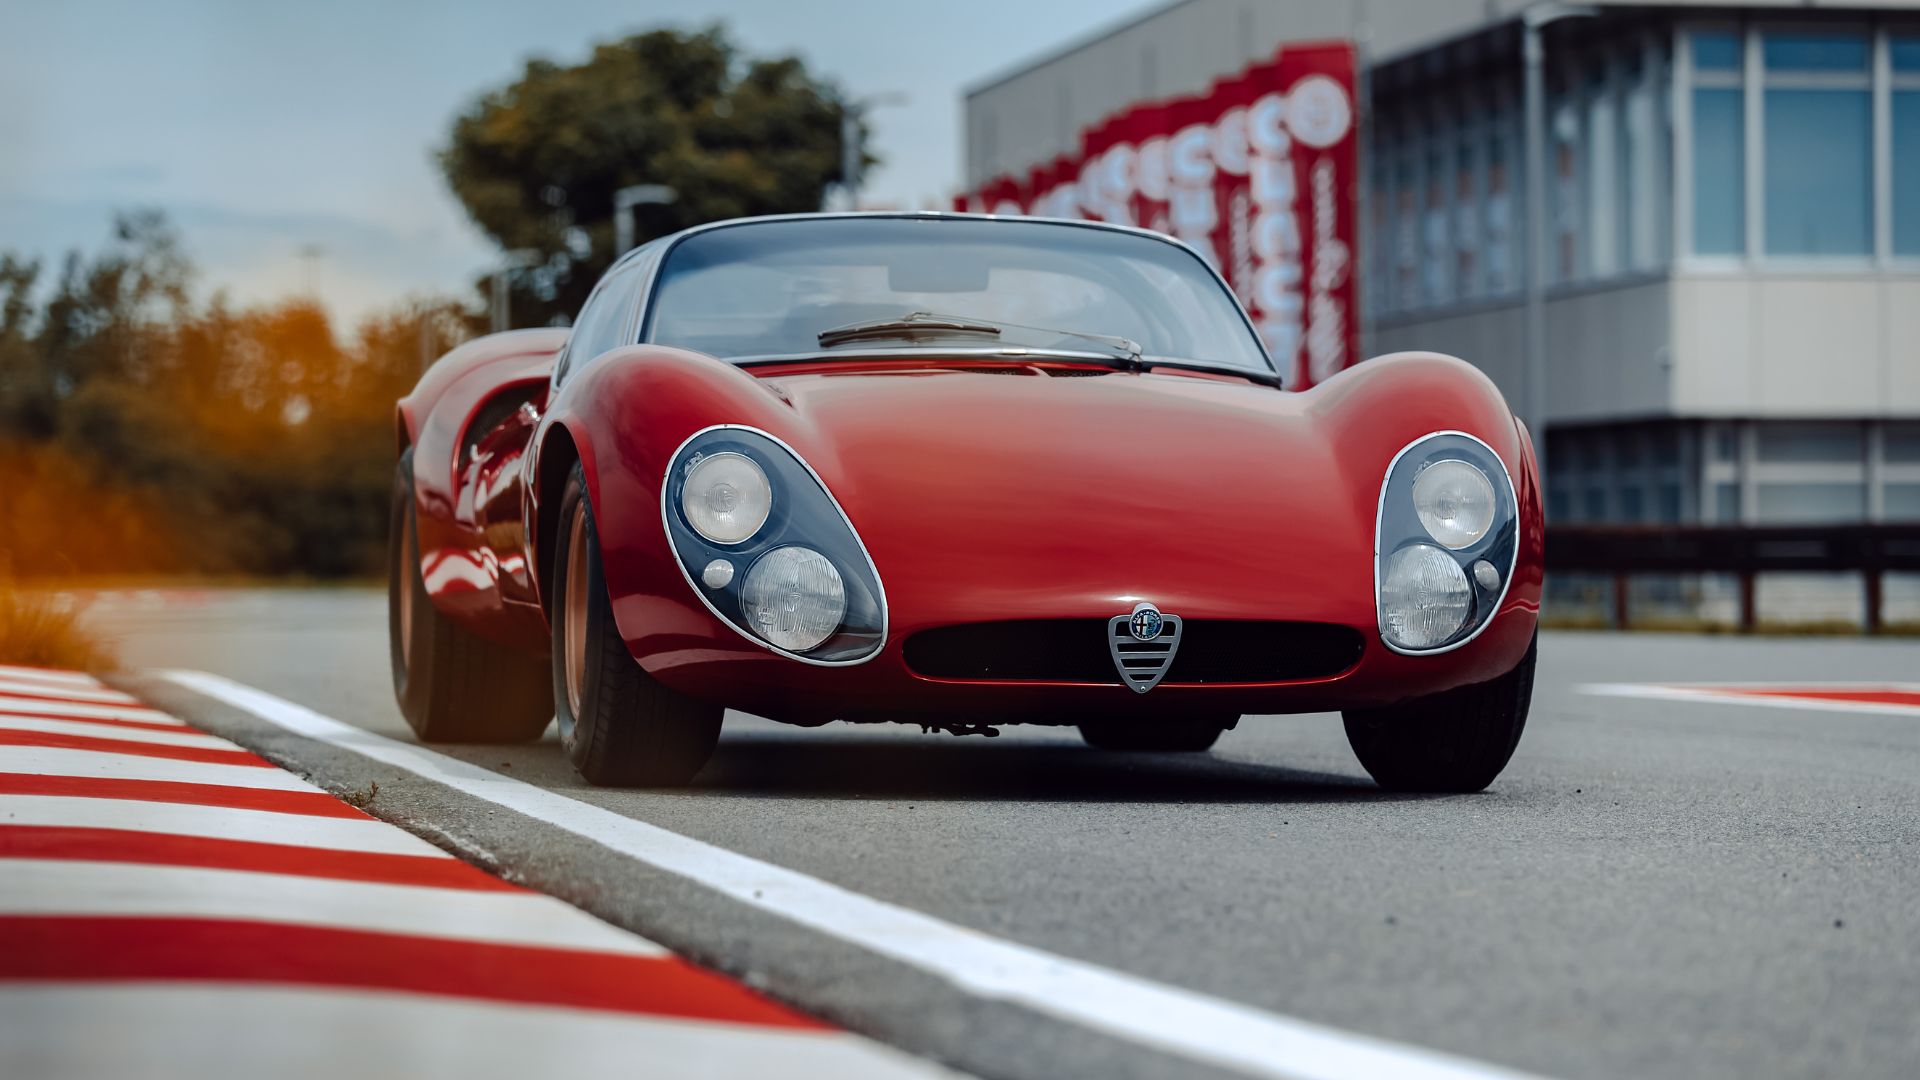 Alfa Romeo 33 Stradale, One of the Very First Supercars